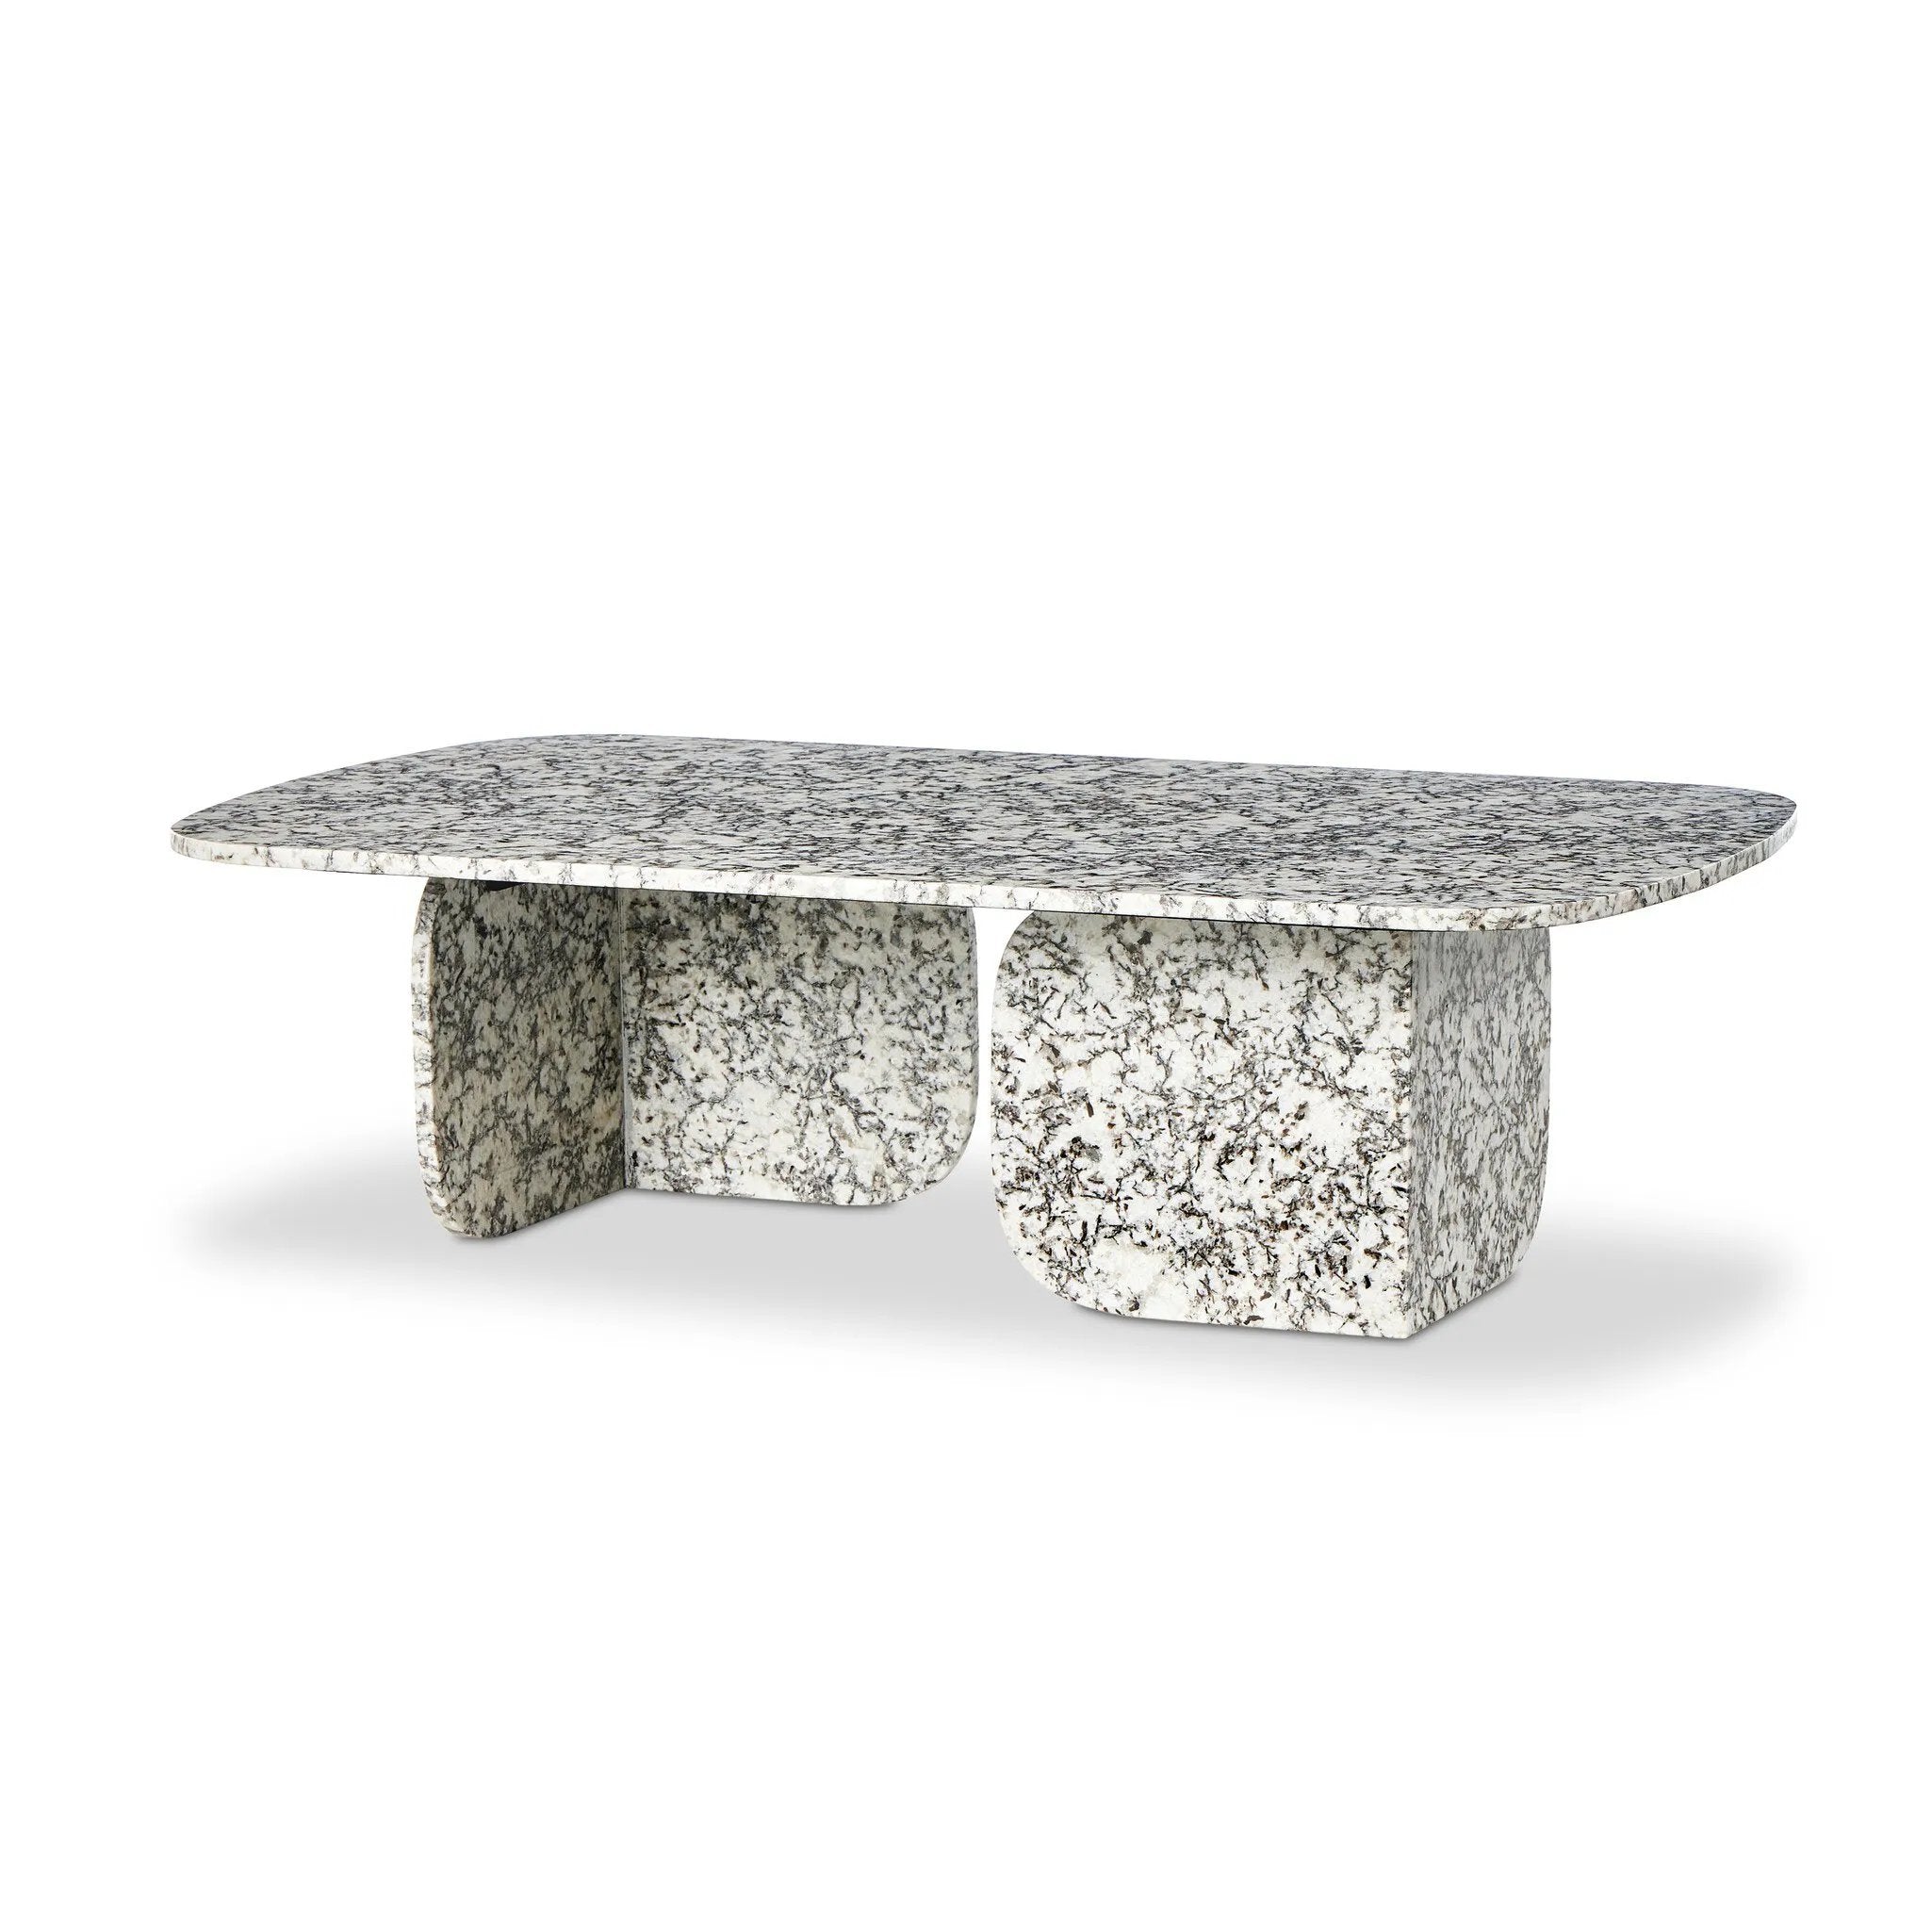 Speckled black marble shapes a unique coffee table with softened corners and subtle Eighties vibes.Collection: Marlo Amethyst Home provides interior design, new home construction design consulting, vintage area rugs, and lighting in the Alpharetta metro area.